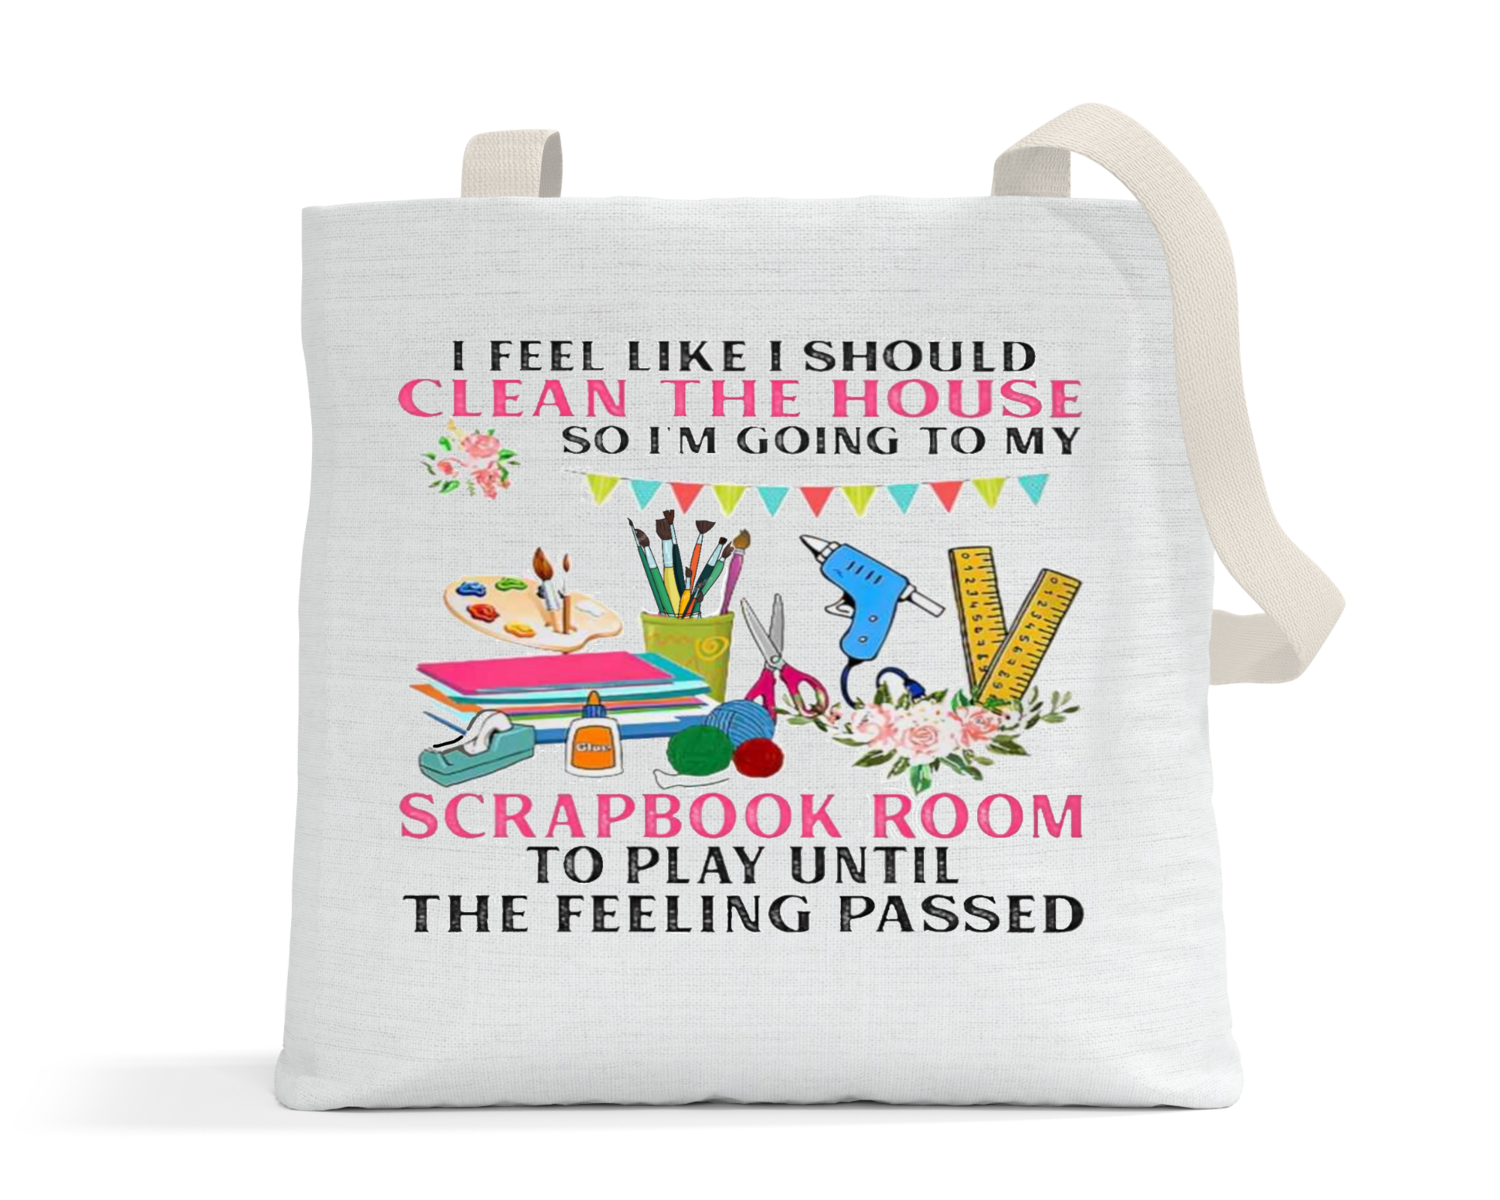 Crafting Tote Bag: I FEEL LIKE I SHOULD CLEAN THE HOUSE, SO I'M GOING TO MY SCRAPBOOK ROOM TO PLAY UNTIL THE FEELING PASSES